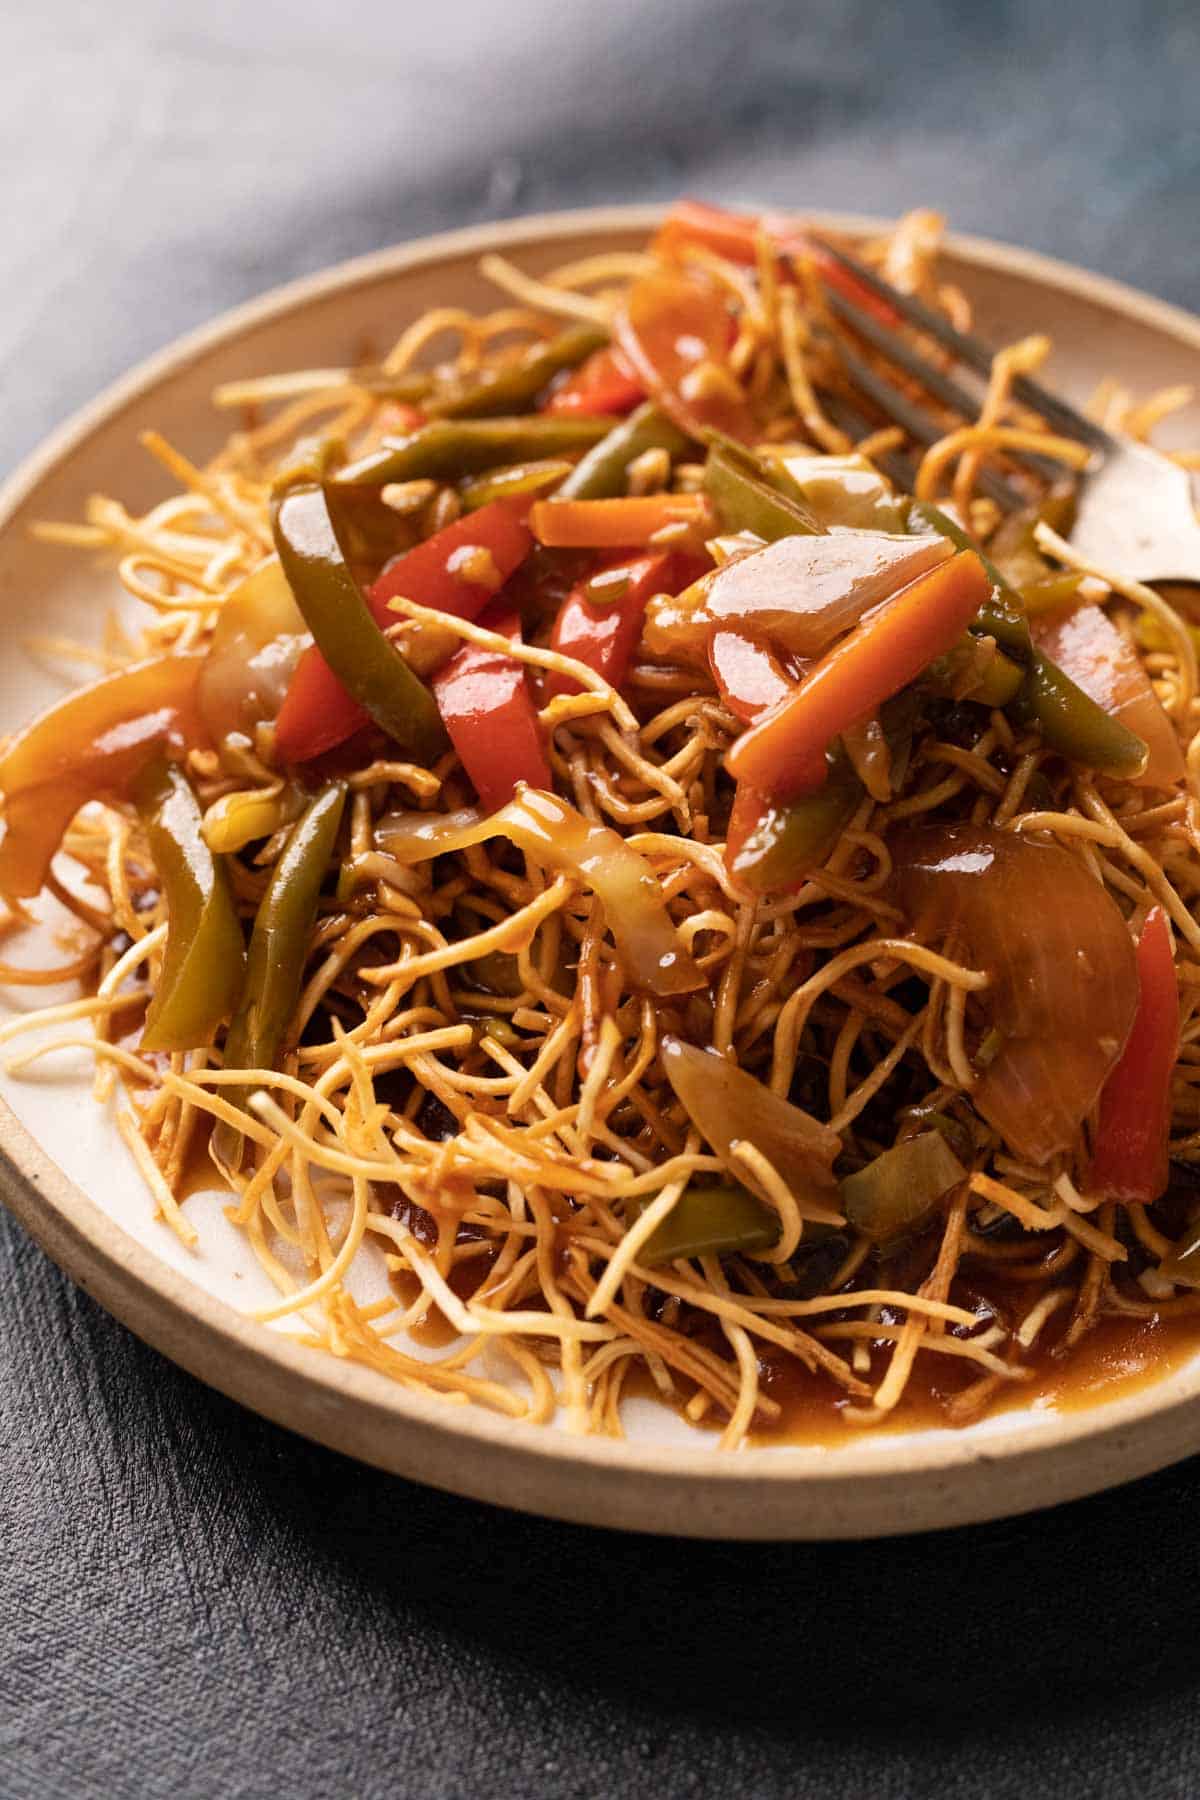 Aemrican Chopsuey served on crispy fried noodles in a white plate with a fork